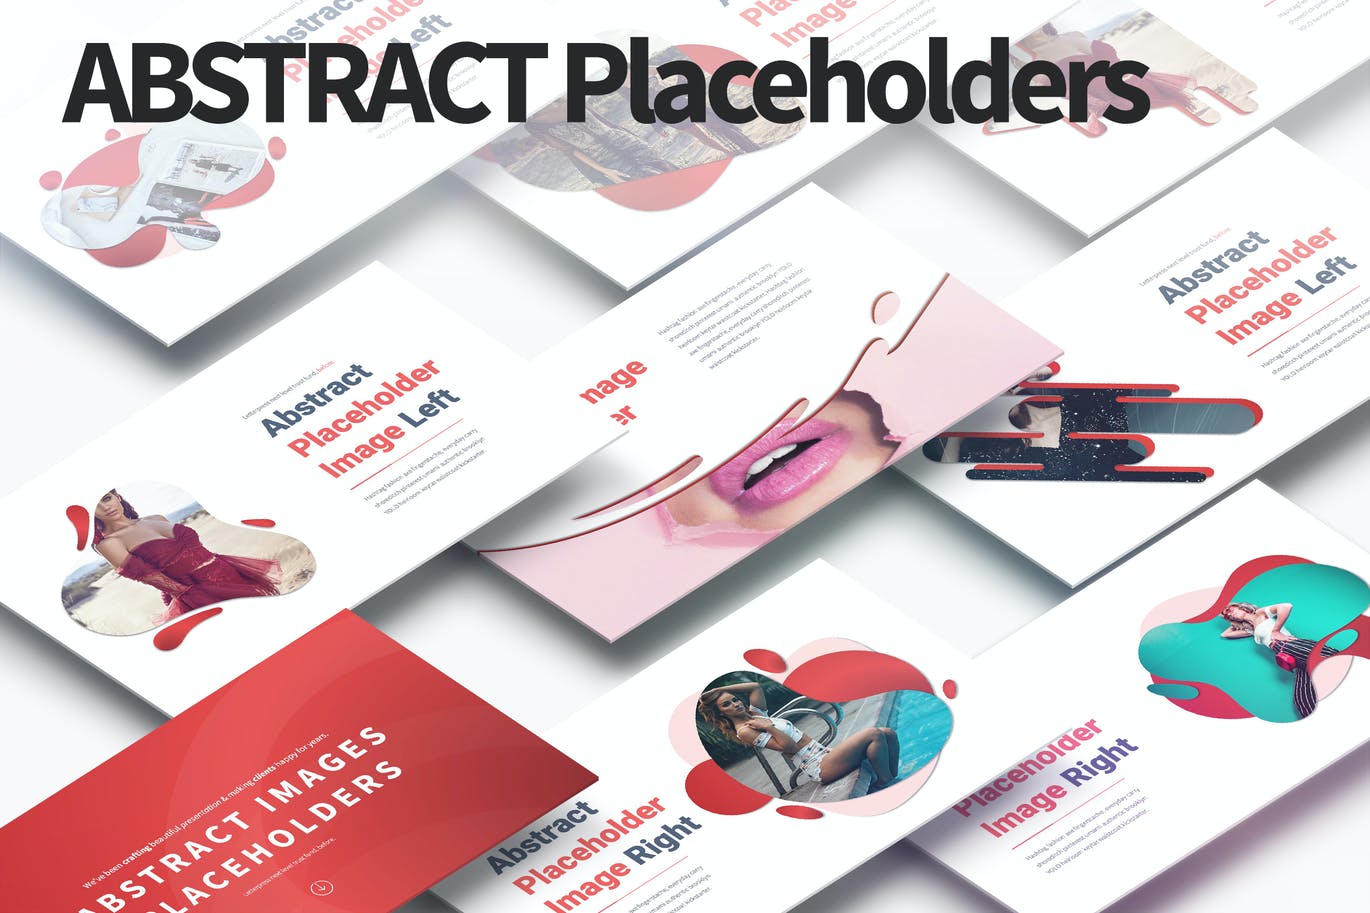 Abstract Images Placeholders - PowerPoint Slides